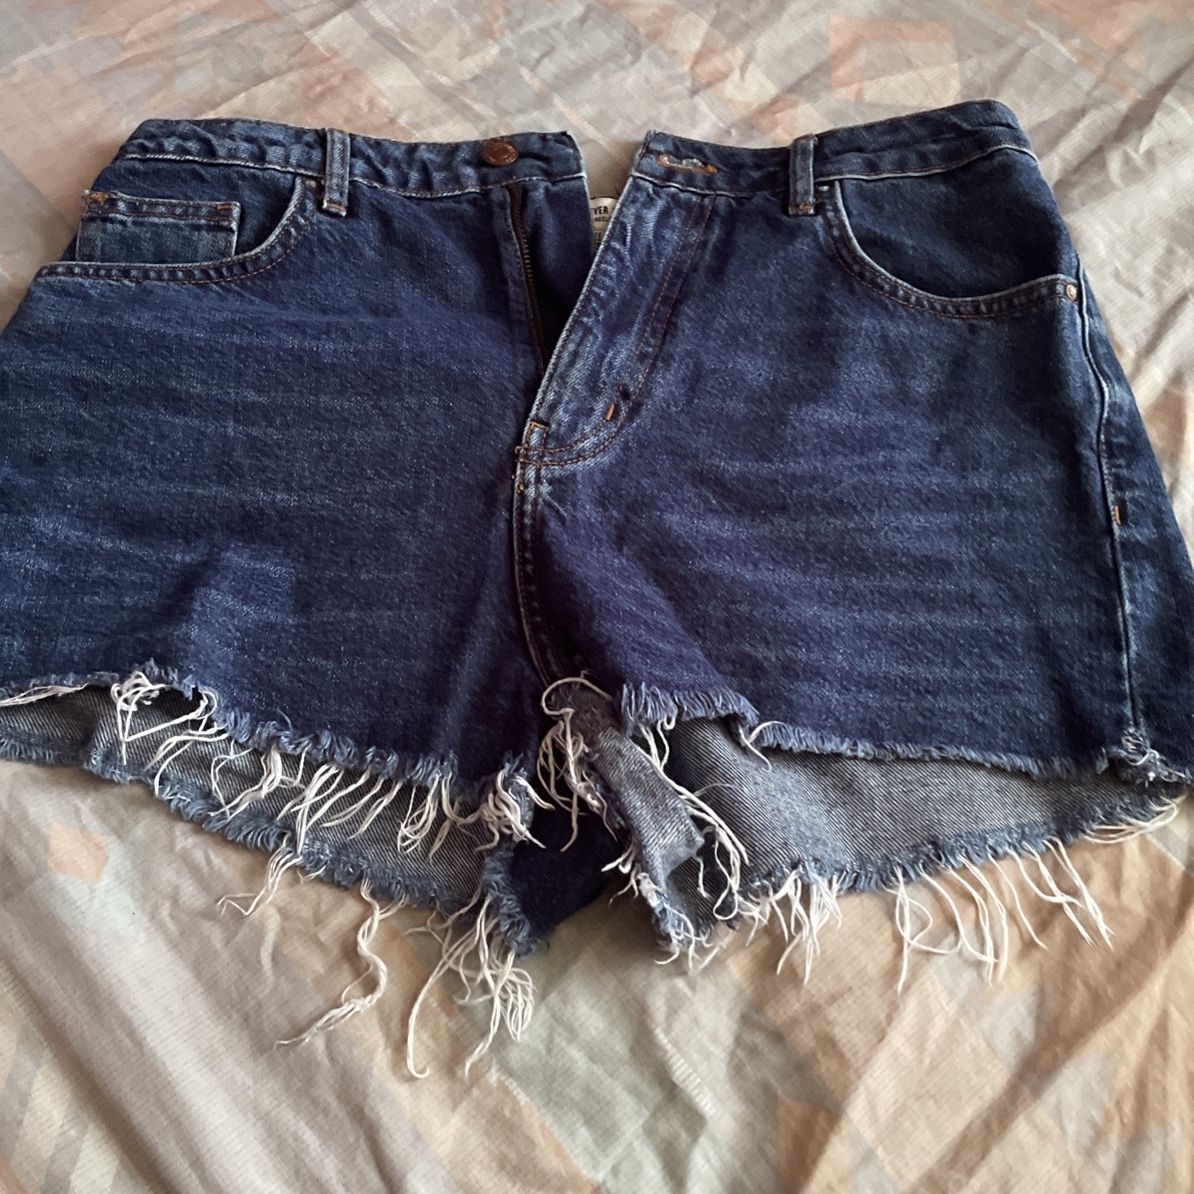 Supreme Shorts for Sale in Euless, TX - OfferUp